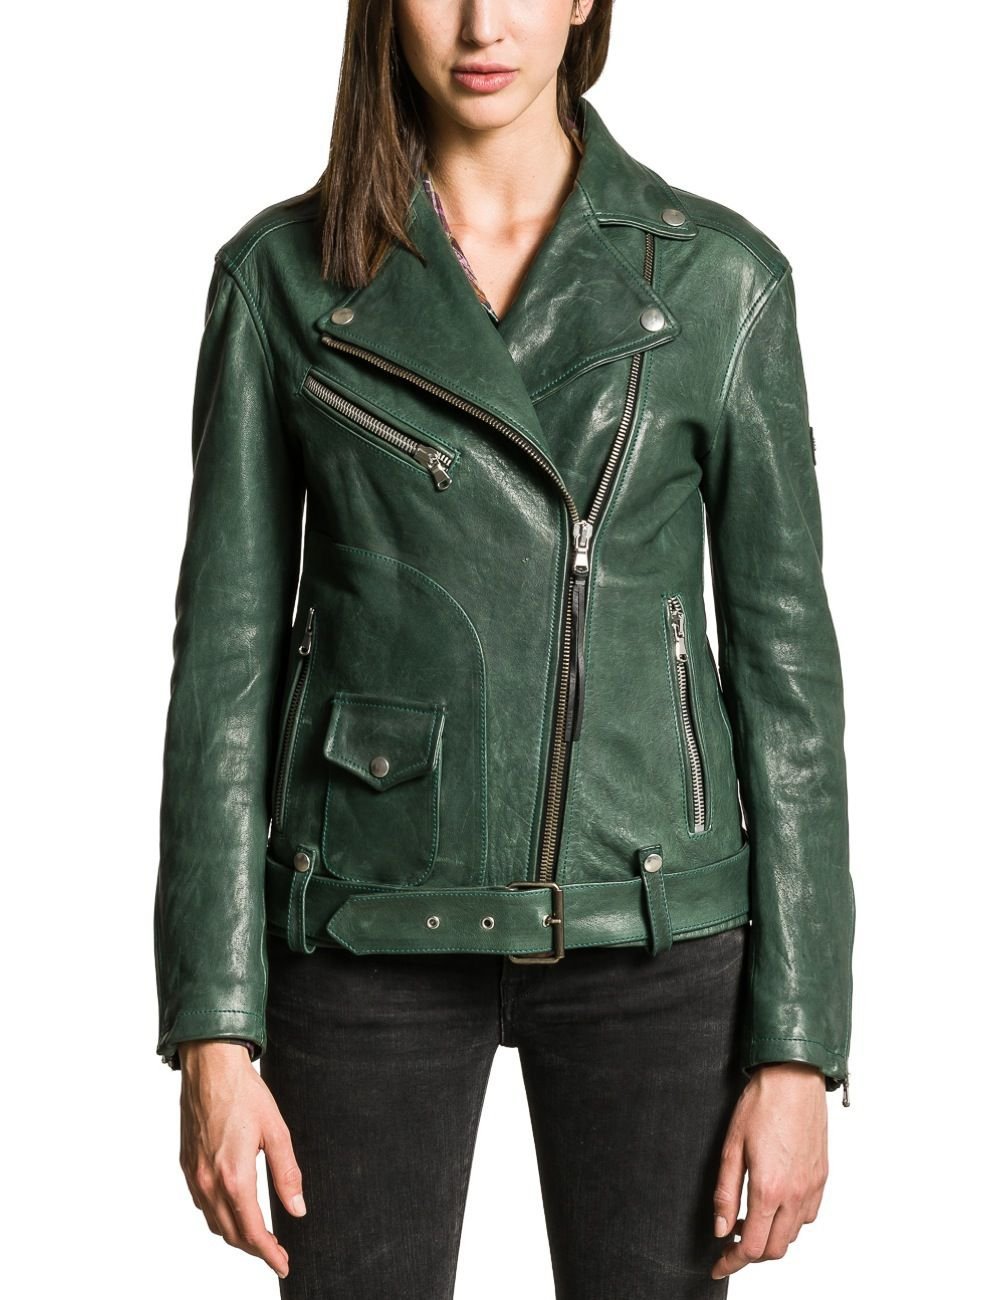 replay-green-leather-jacket-product-1-22